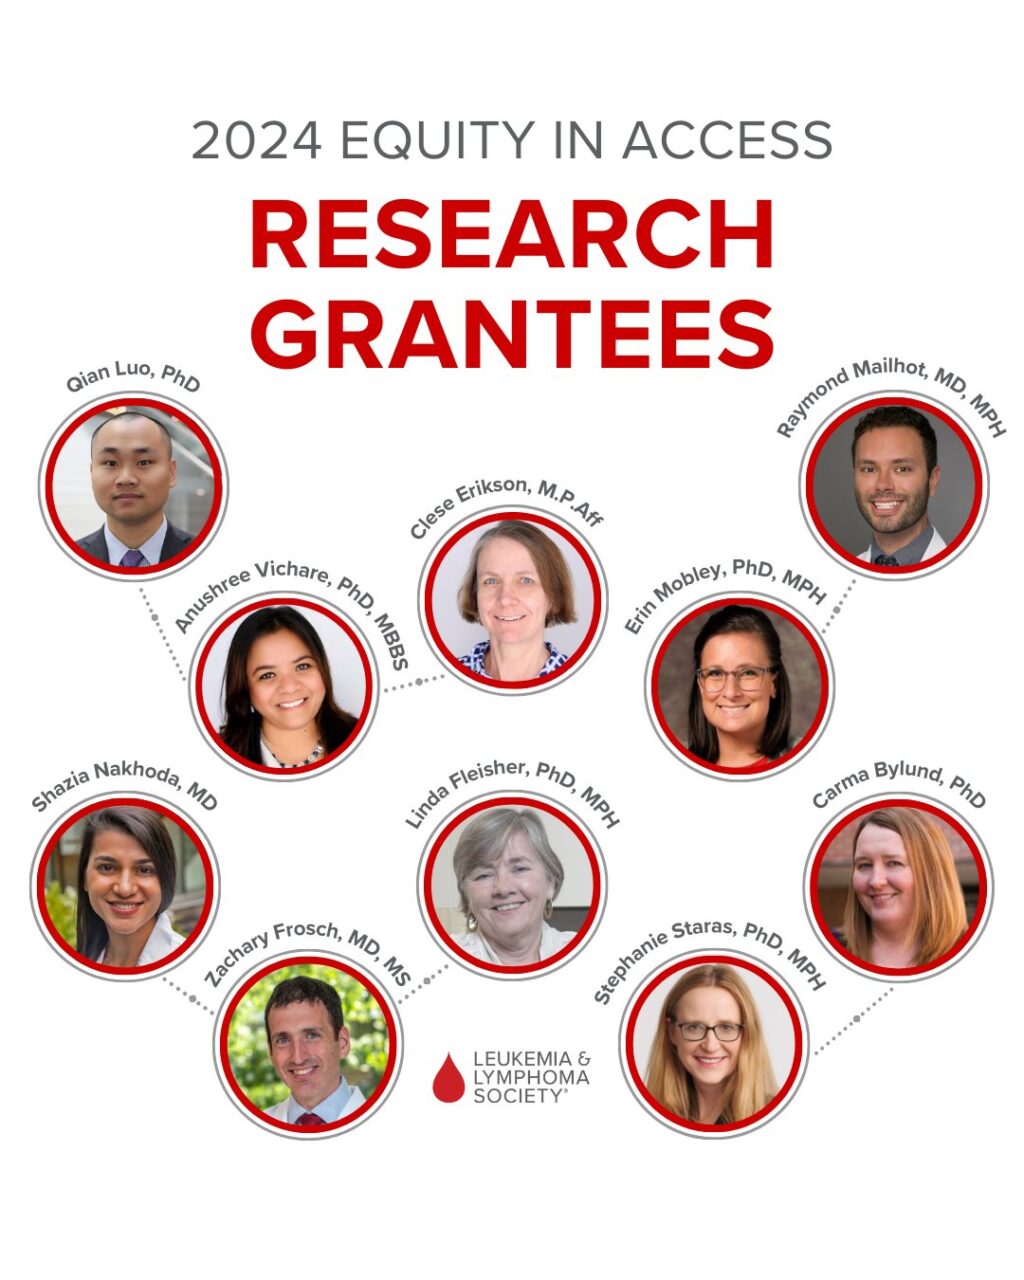 2024 Equity in Access Research Program Grantees of The Leukemia and Lymphoma Society